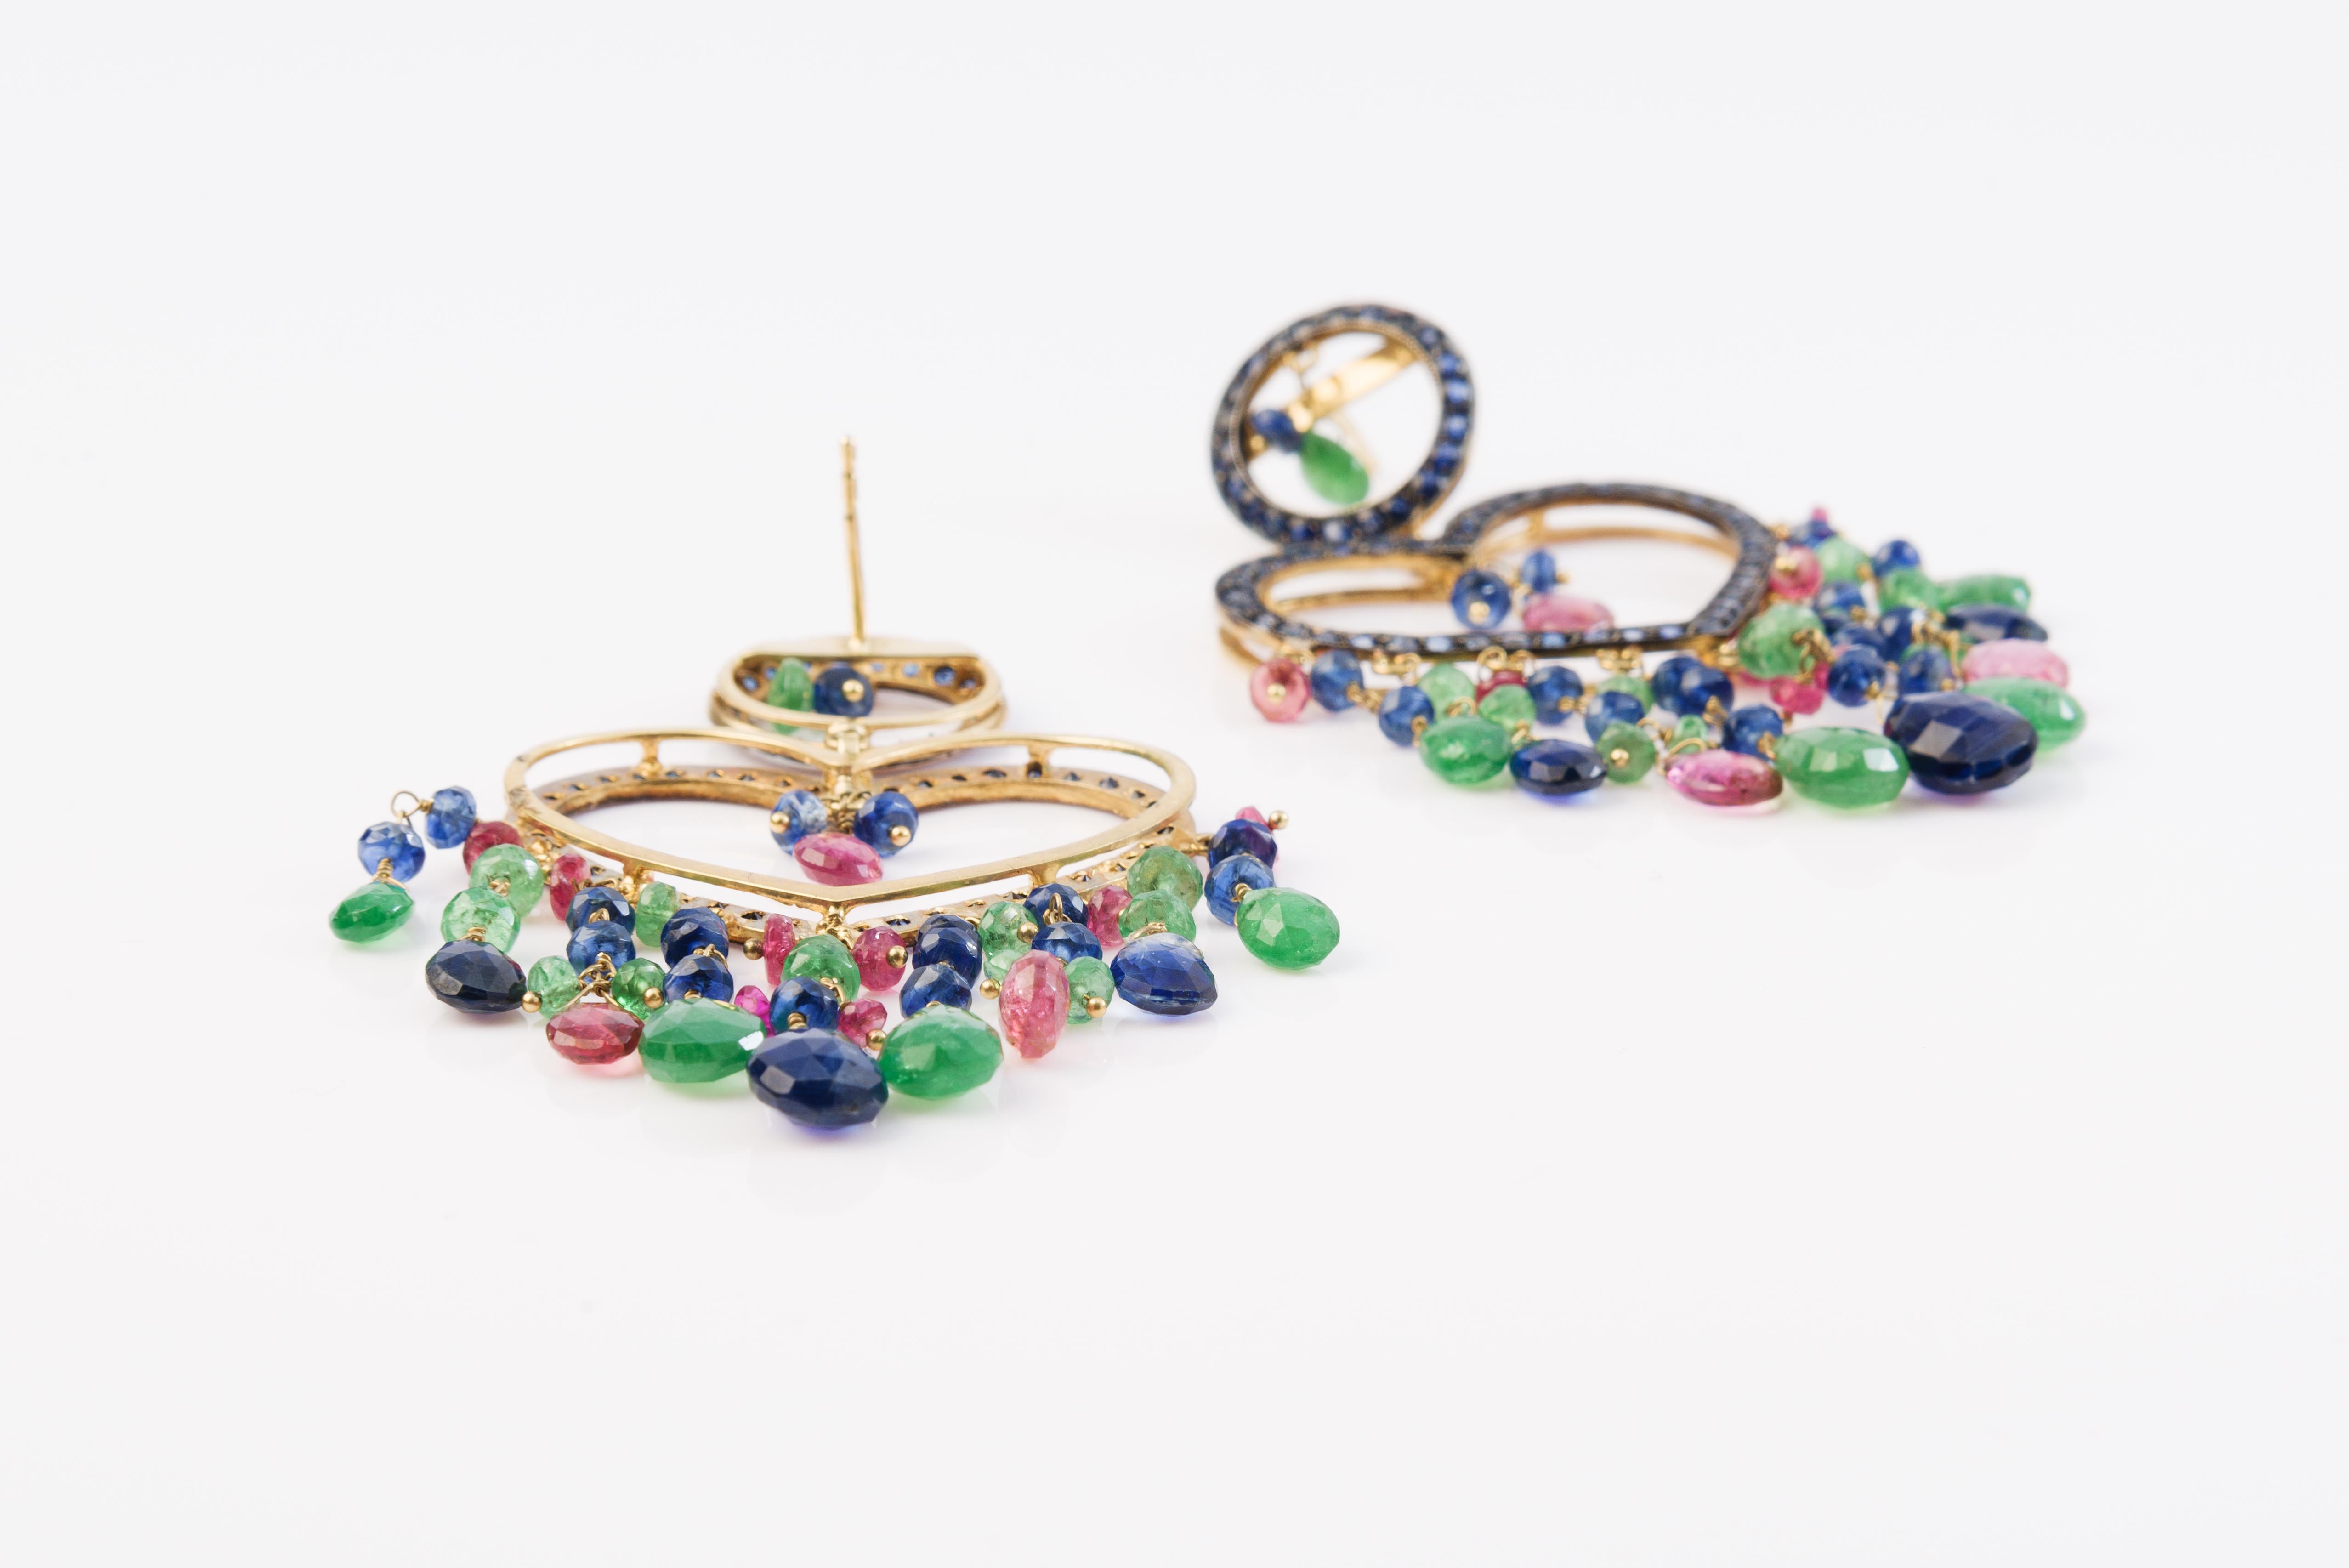 Big Heart Earring with Emeralds, Sapphires and Black Diamond in Silver and Gold In New Condition For Sale In Ariano Irpino, IT